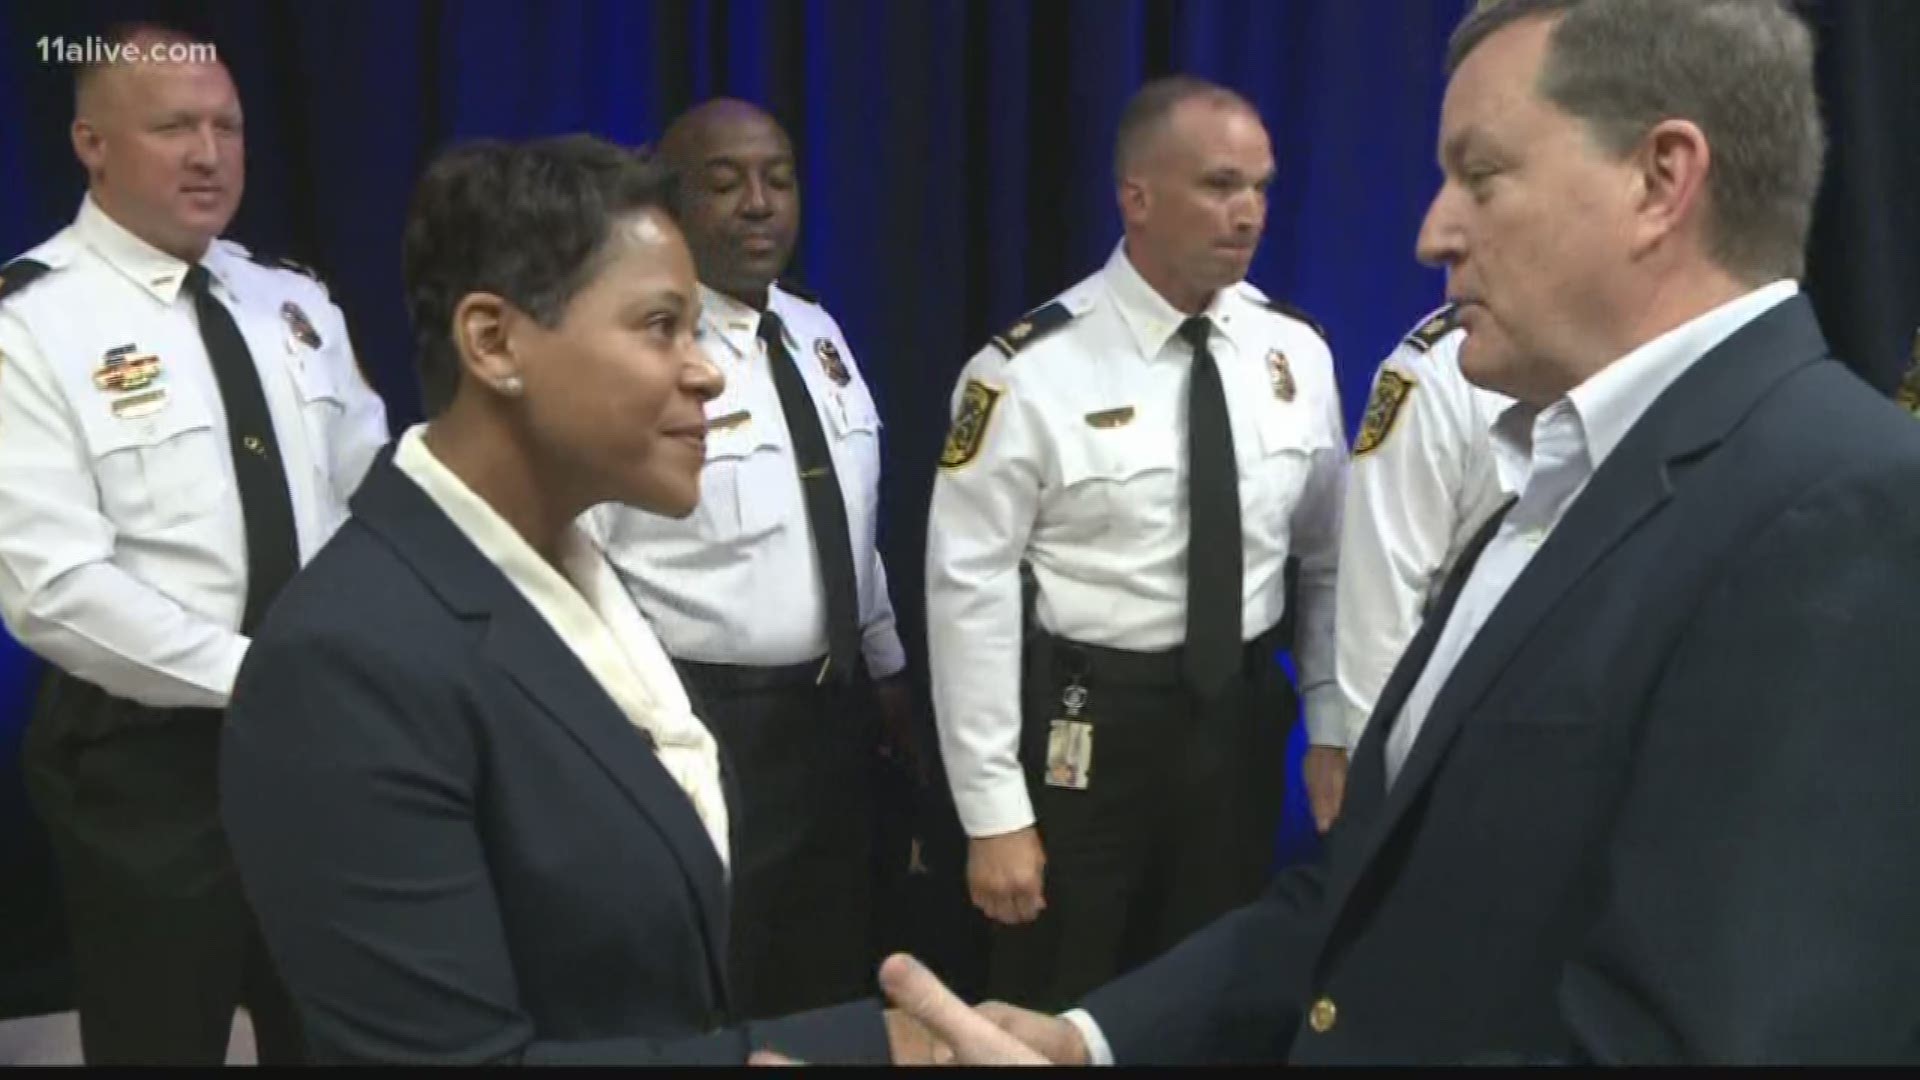 She oversaw more than 1,000 employees leading one of the Miami police department's largest divisions.